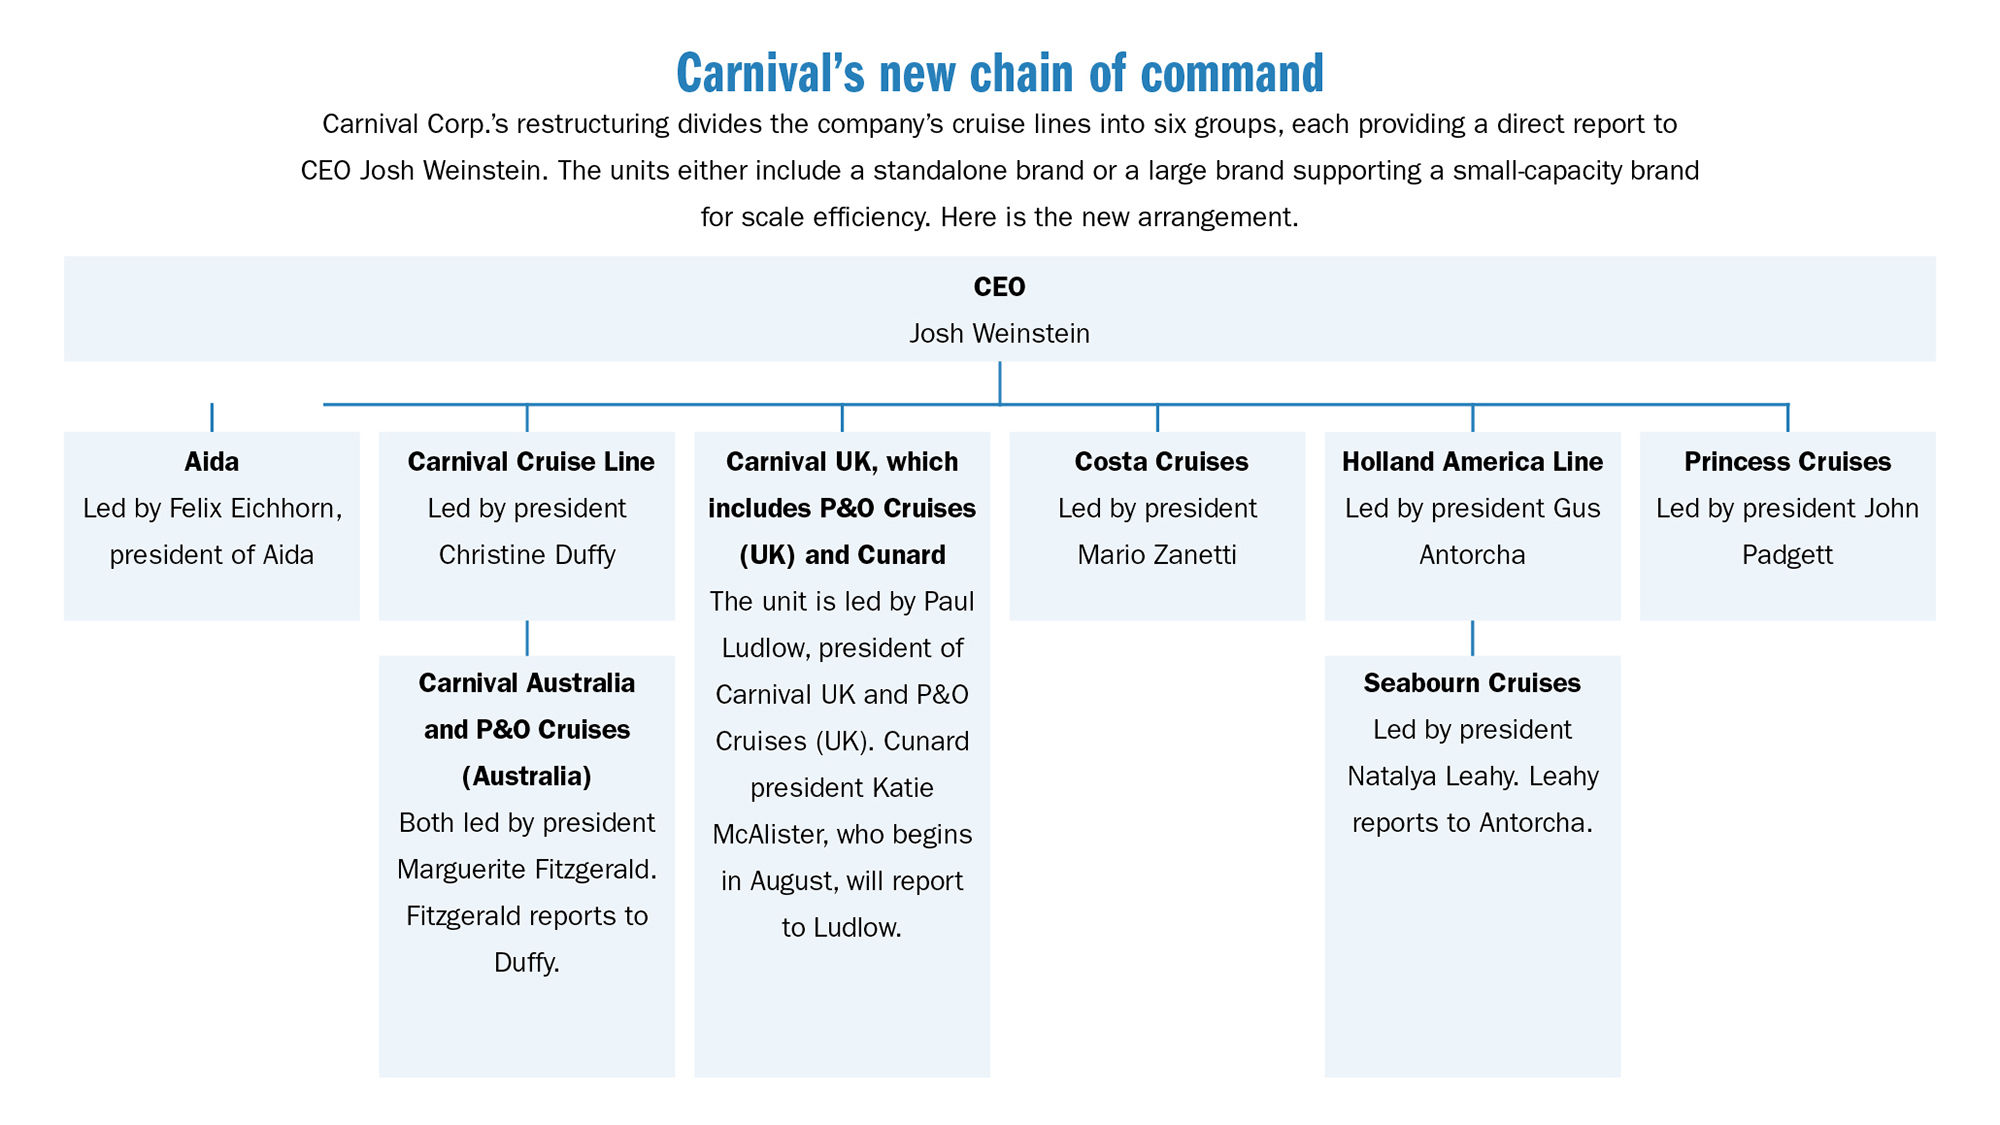 Travel advisors view Carnival Corp. reorganization favorably